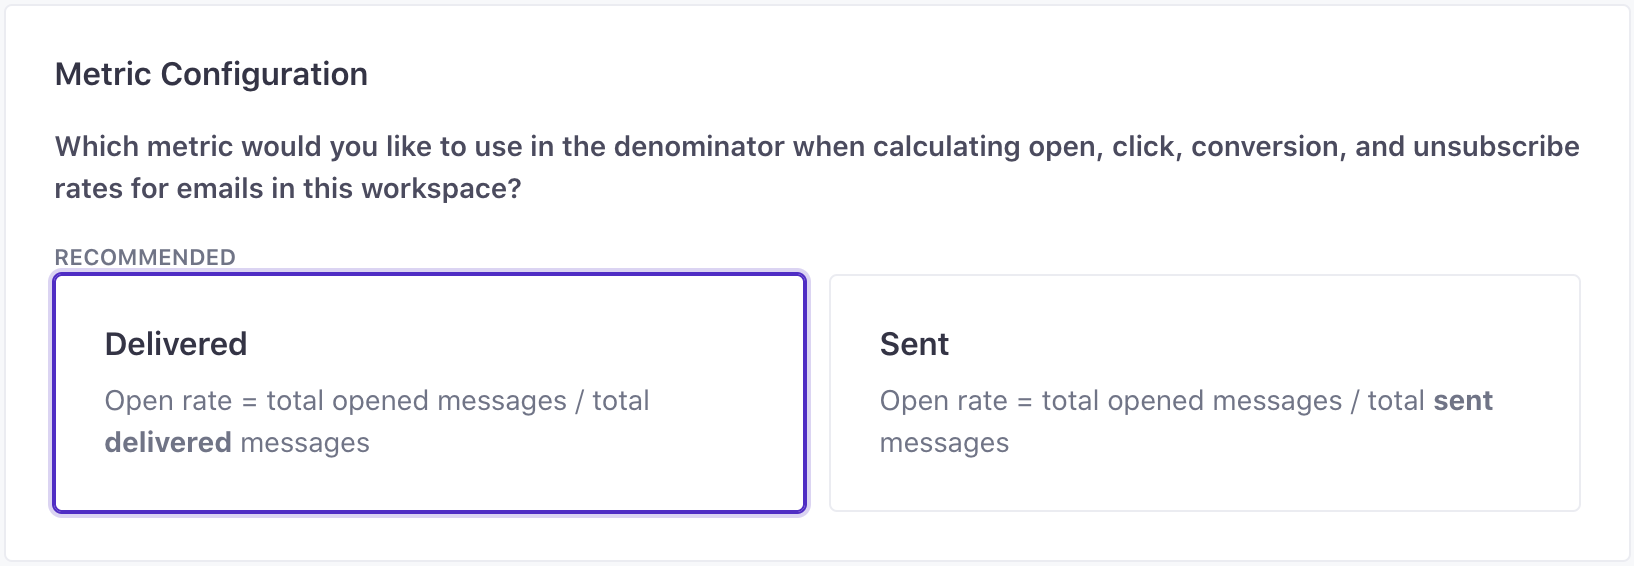 Select whether to calculate metrics based on sent or delivered messages